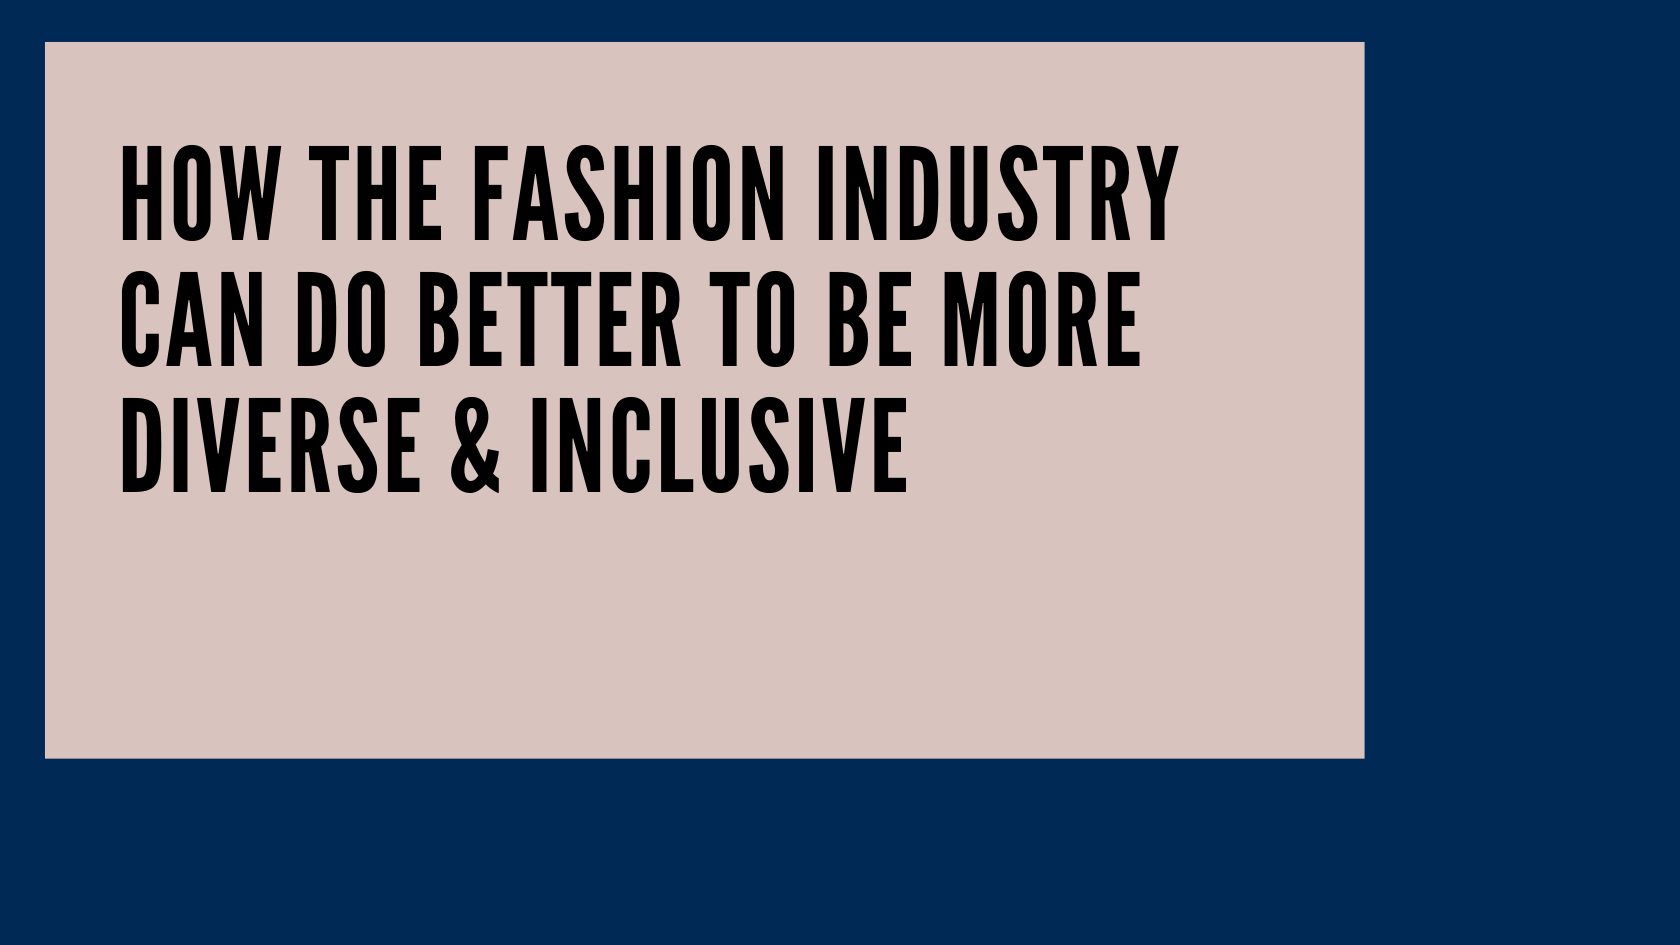 How the Fashion Industry Can Do Better to be More Diverse & Inclusive